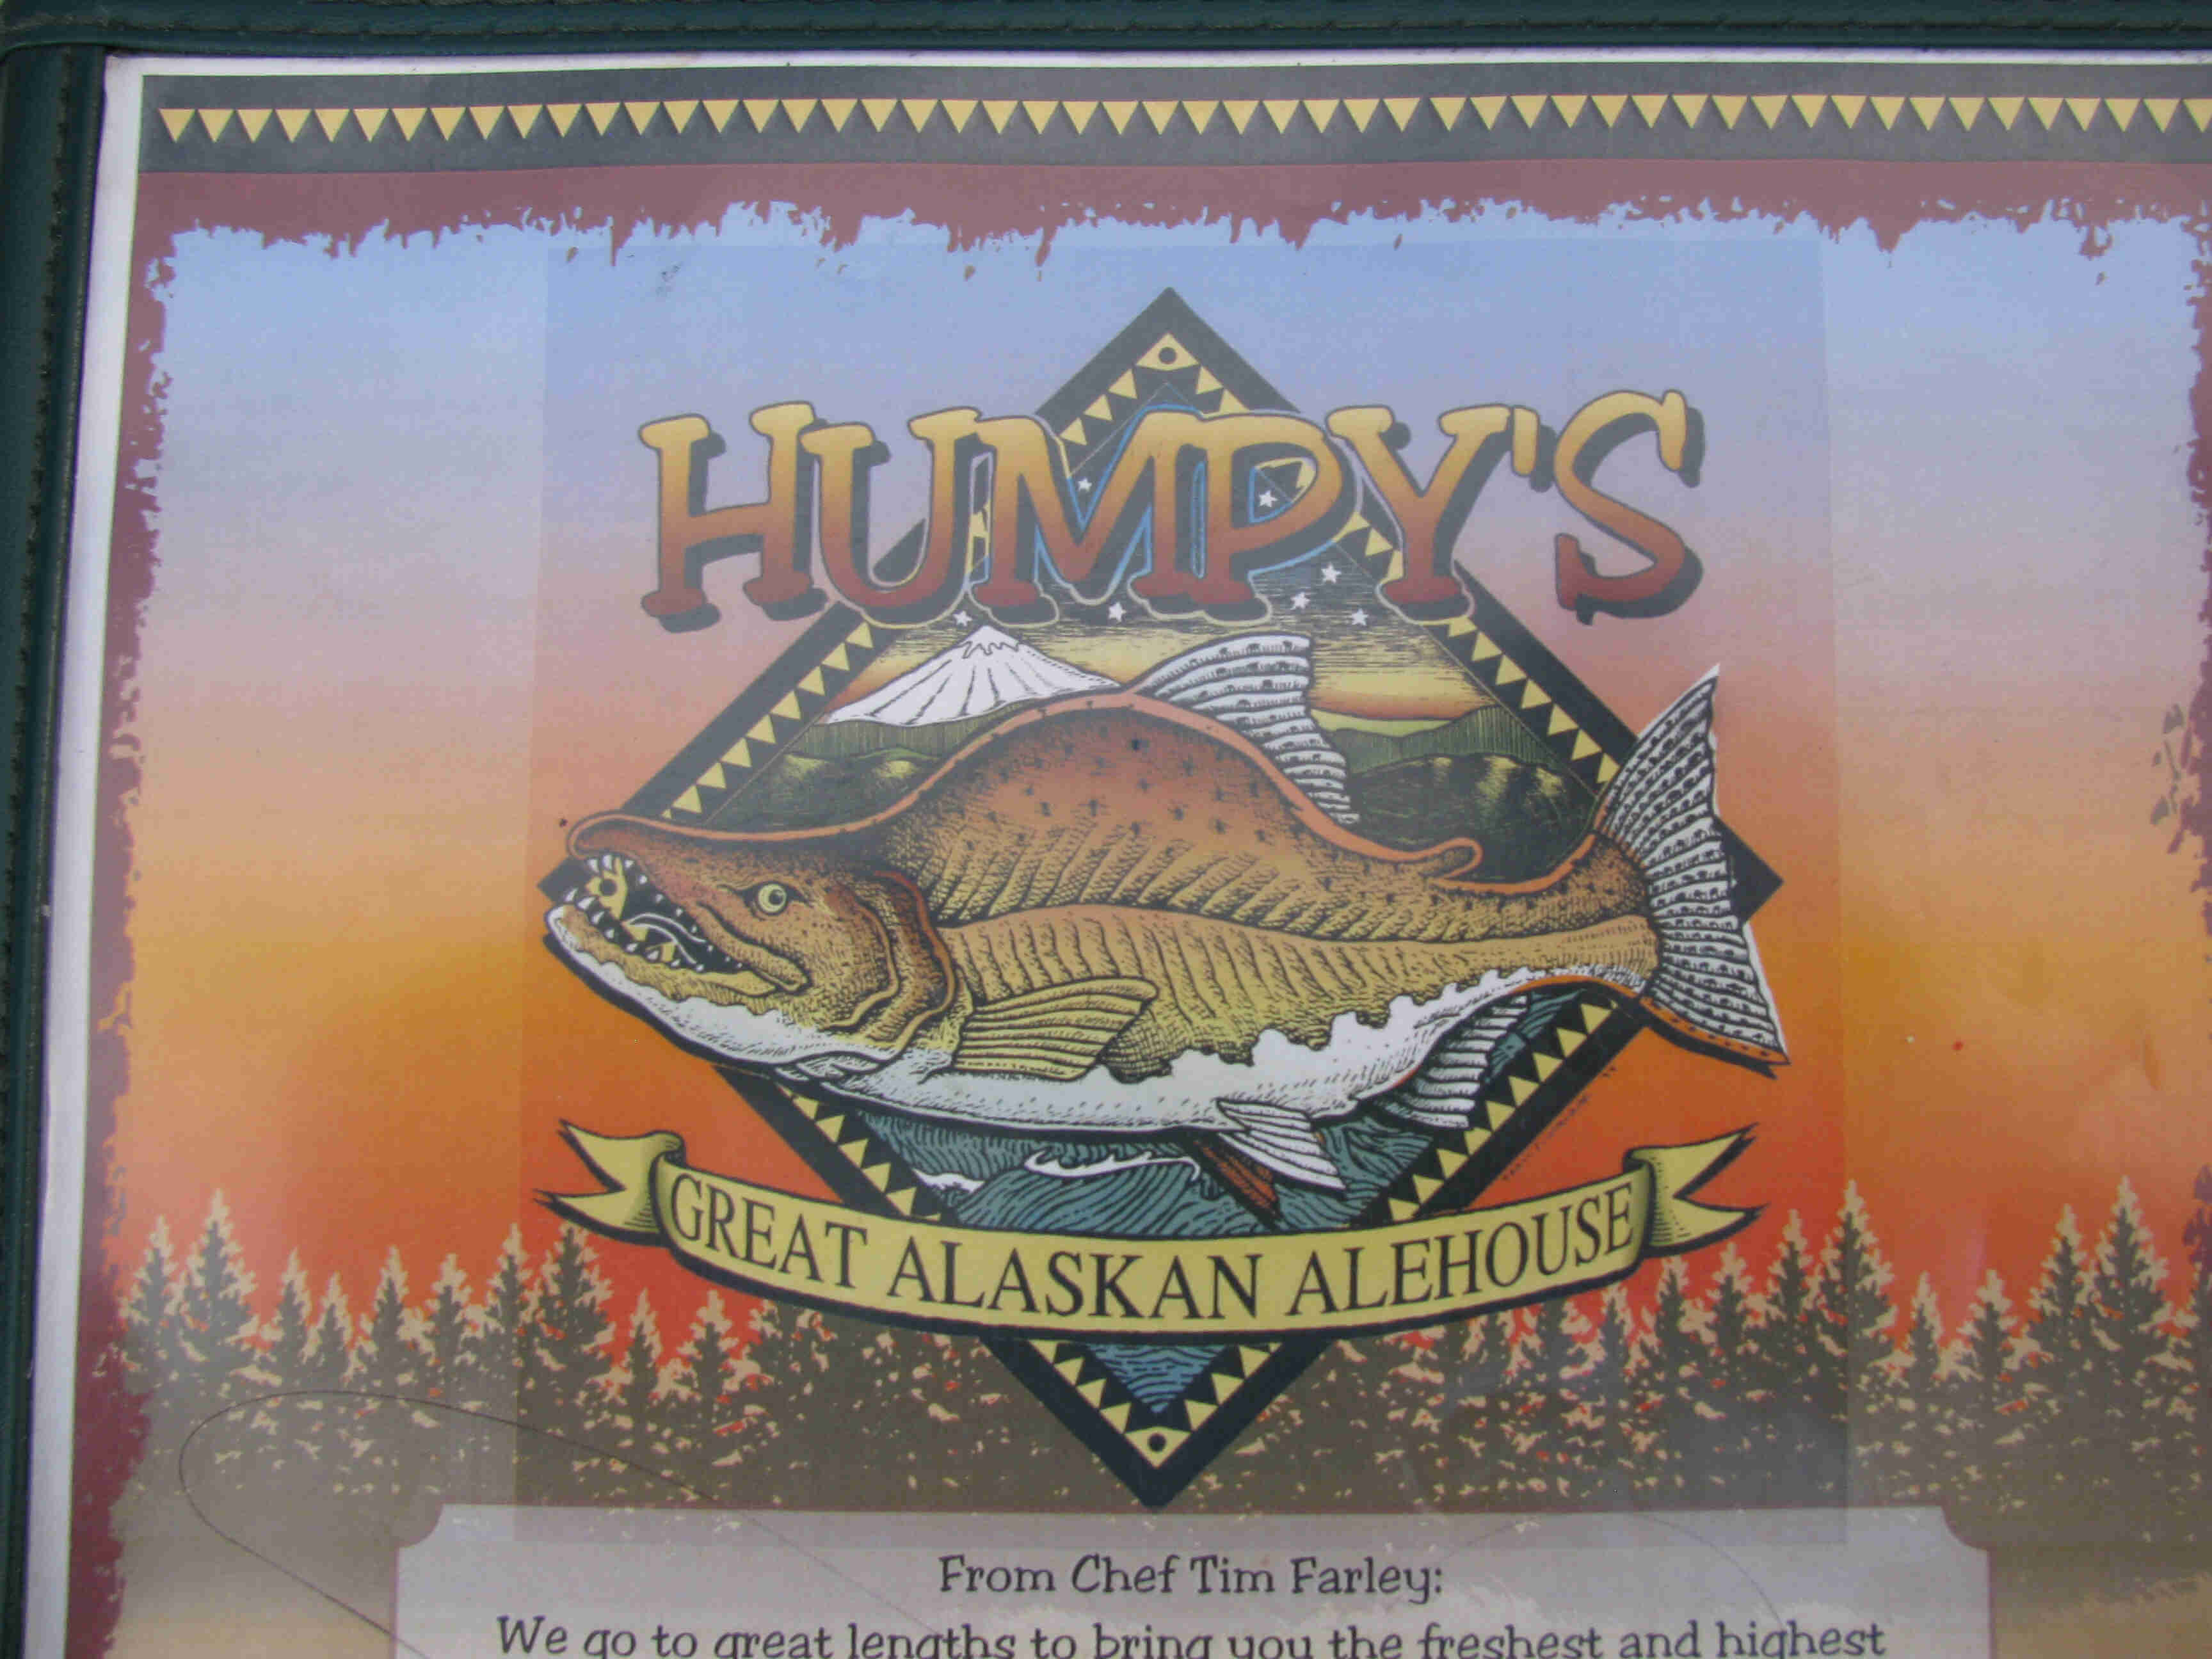 Downward front view of a menu cover for Humpy's Great Alaskan Ale House, with a colored fish illustration on it